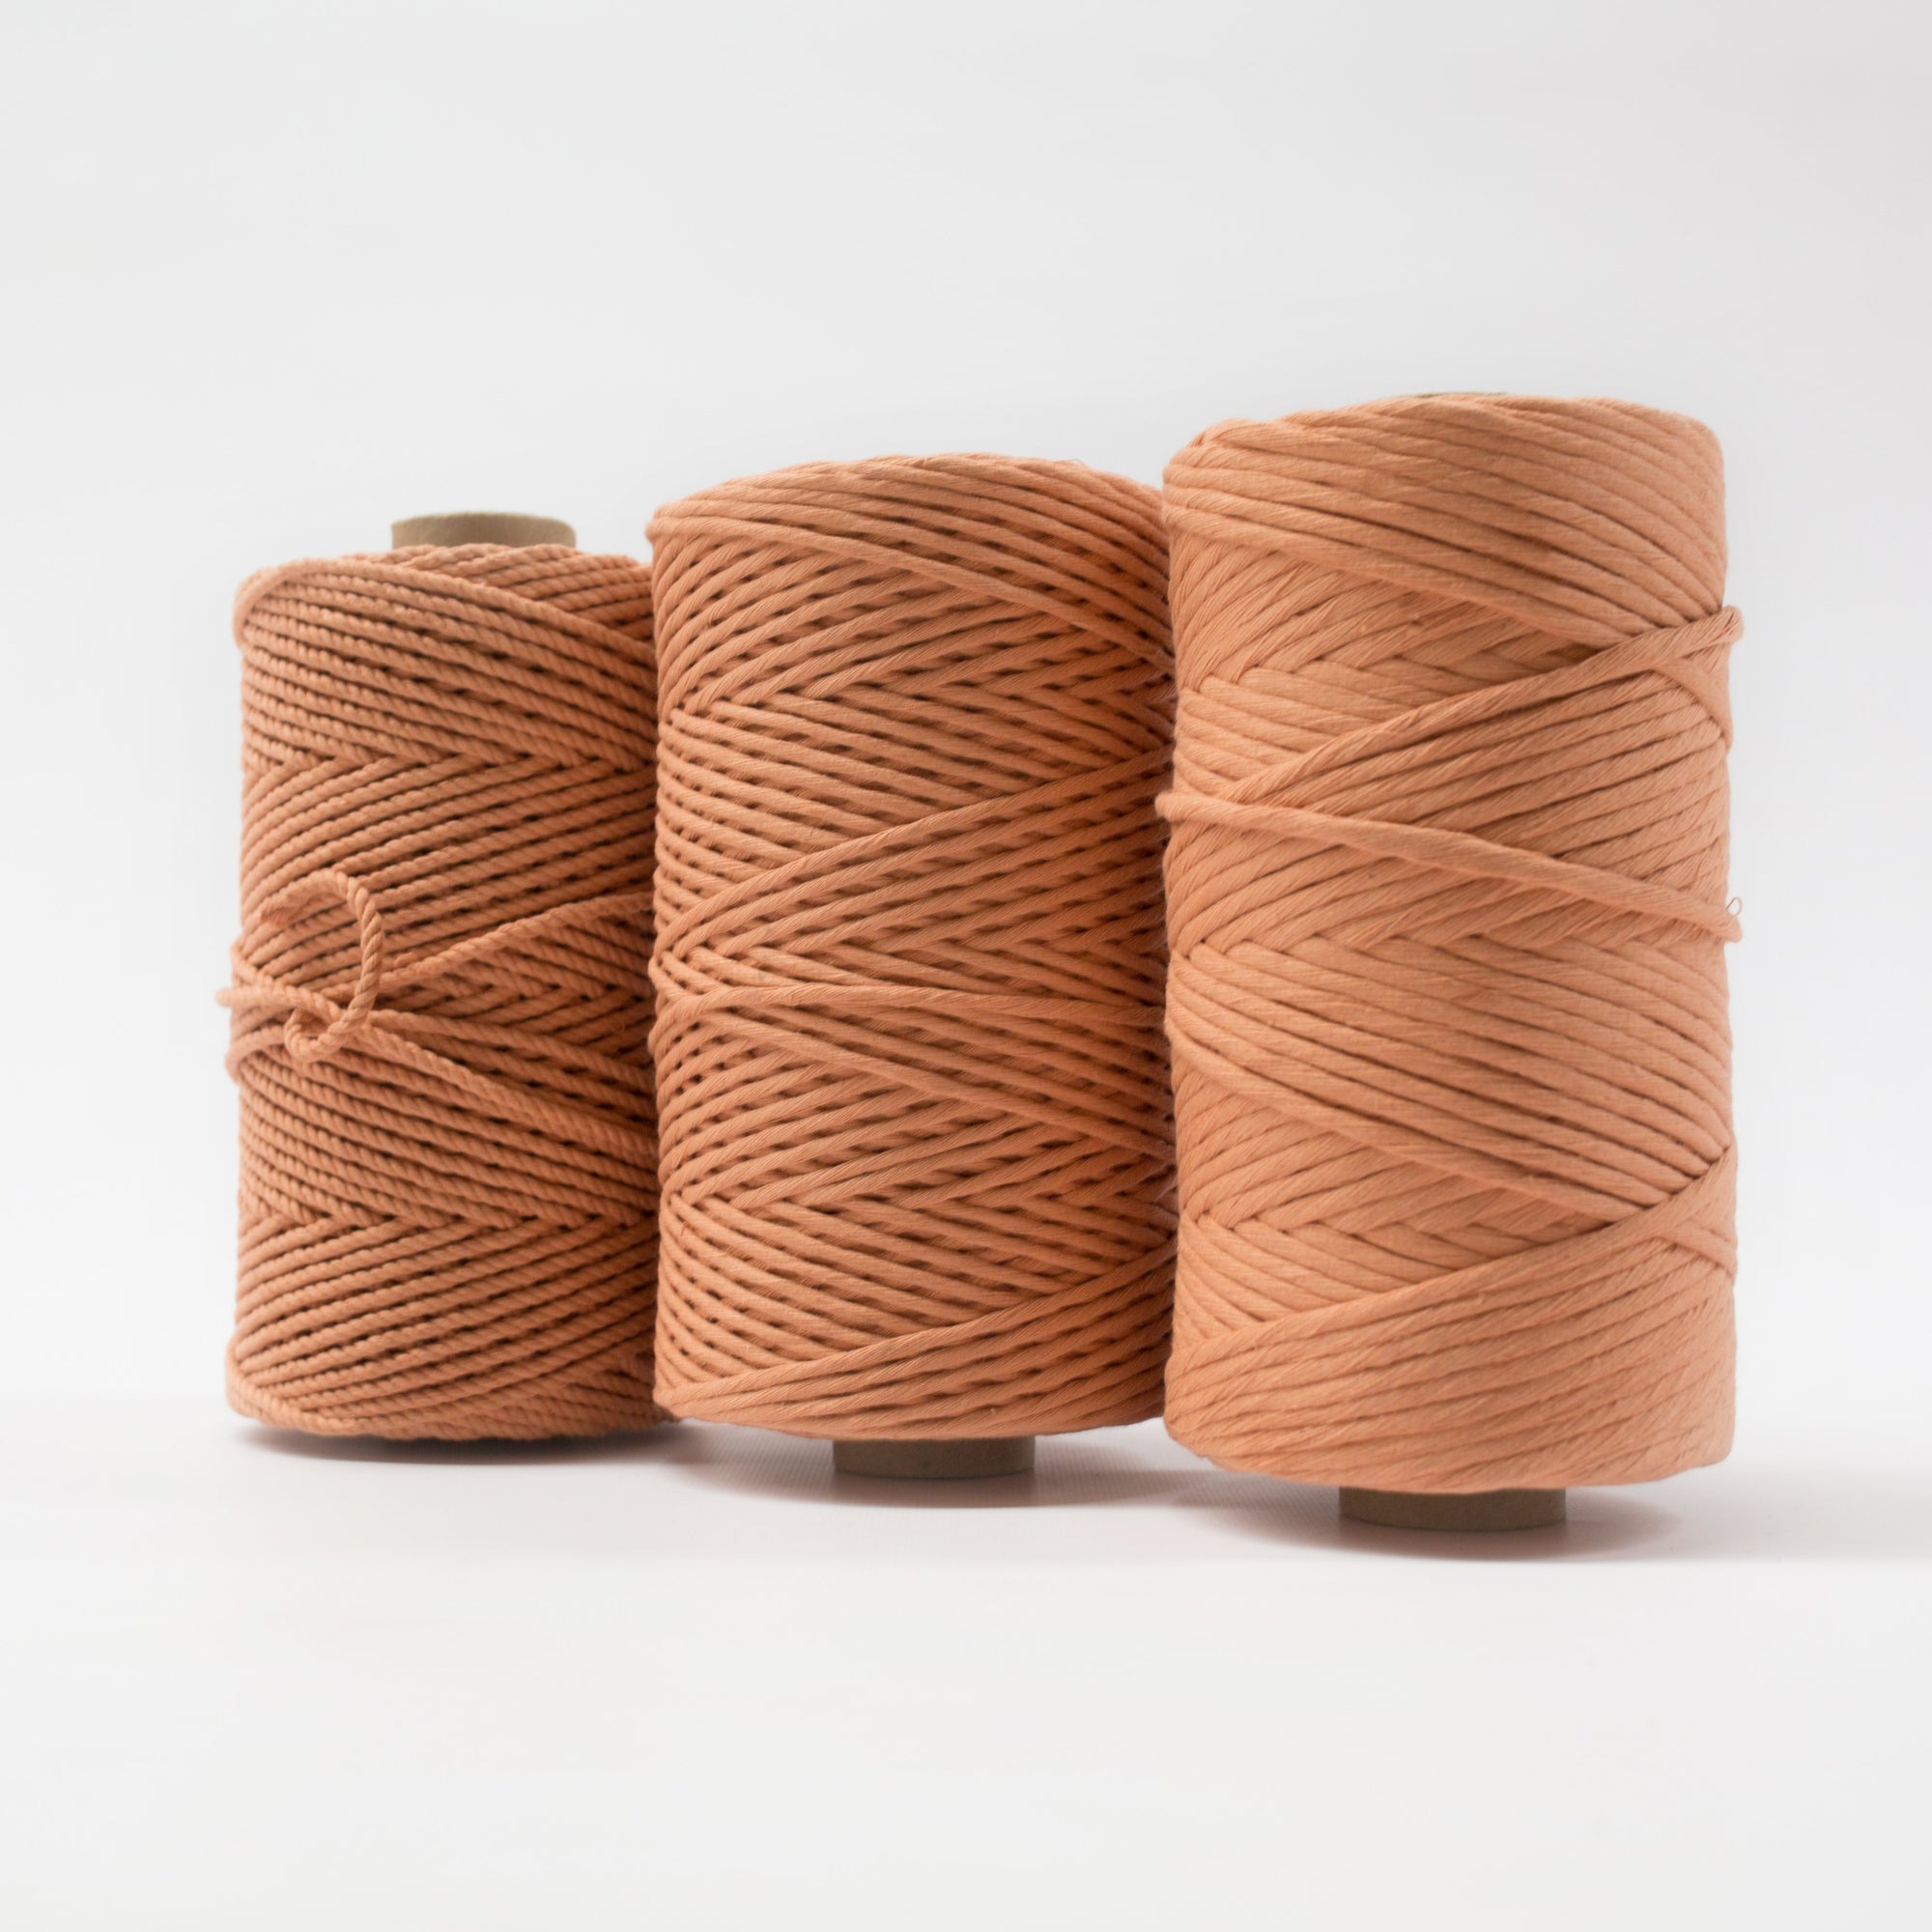 4mm - Macrame Cotton Rope / Wholesale Available - Mary Maker Studio -  Macrame & Weaving Supplies and Education.